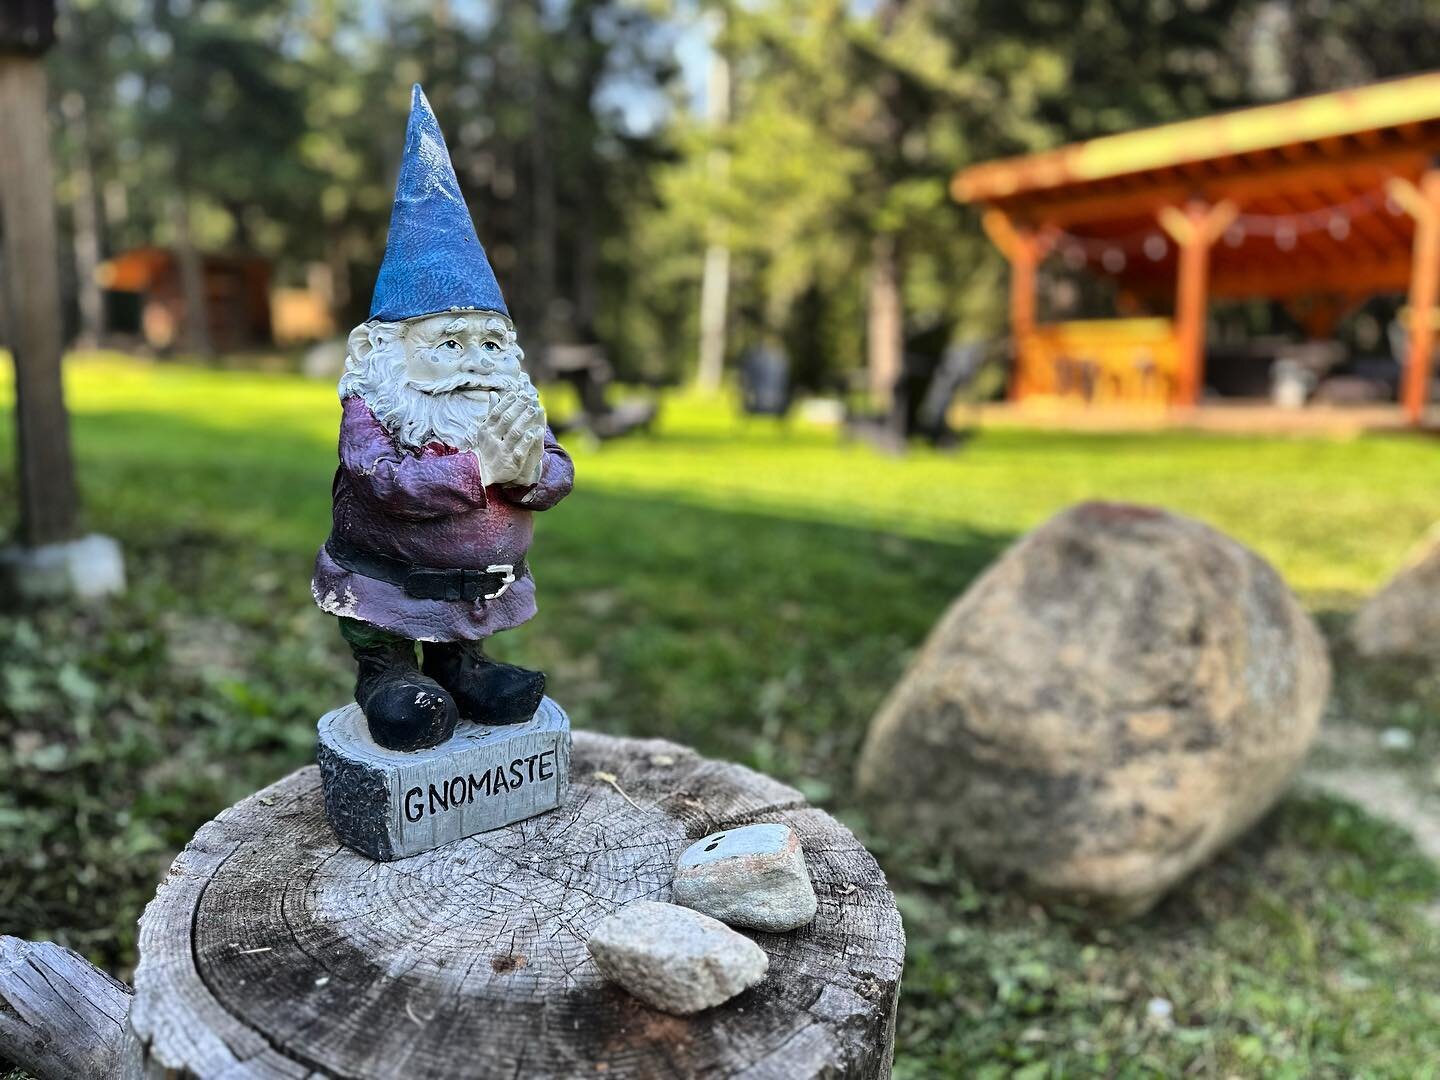 Gnomaste says the lawn is firing and the vibe is chill, get up here. 

#bralorneadventurelodge